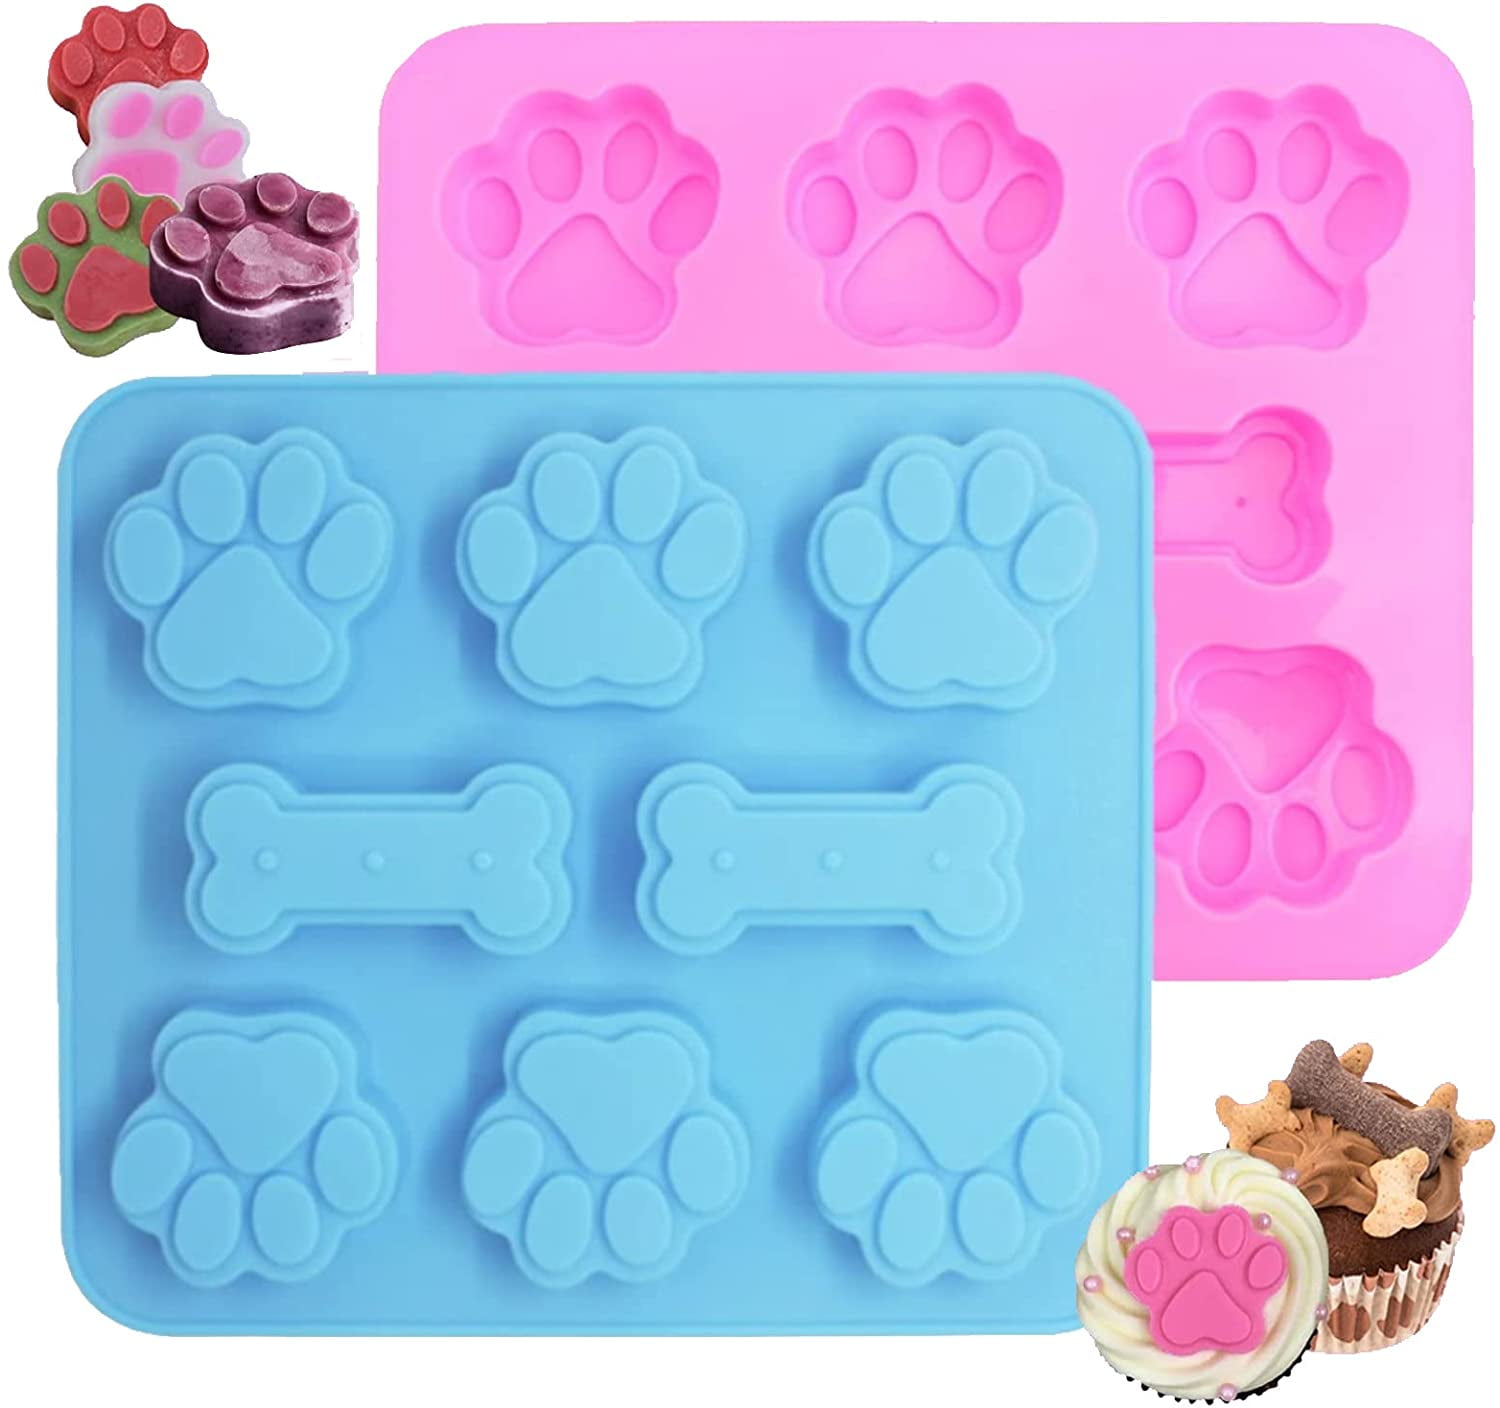 Dog Treat Molds Mini Silicone Mold For Candy, Chocolate, Biscuit